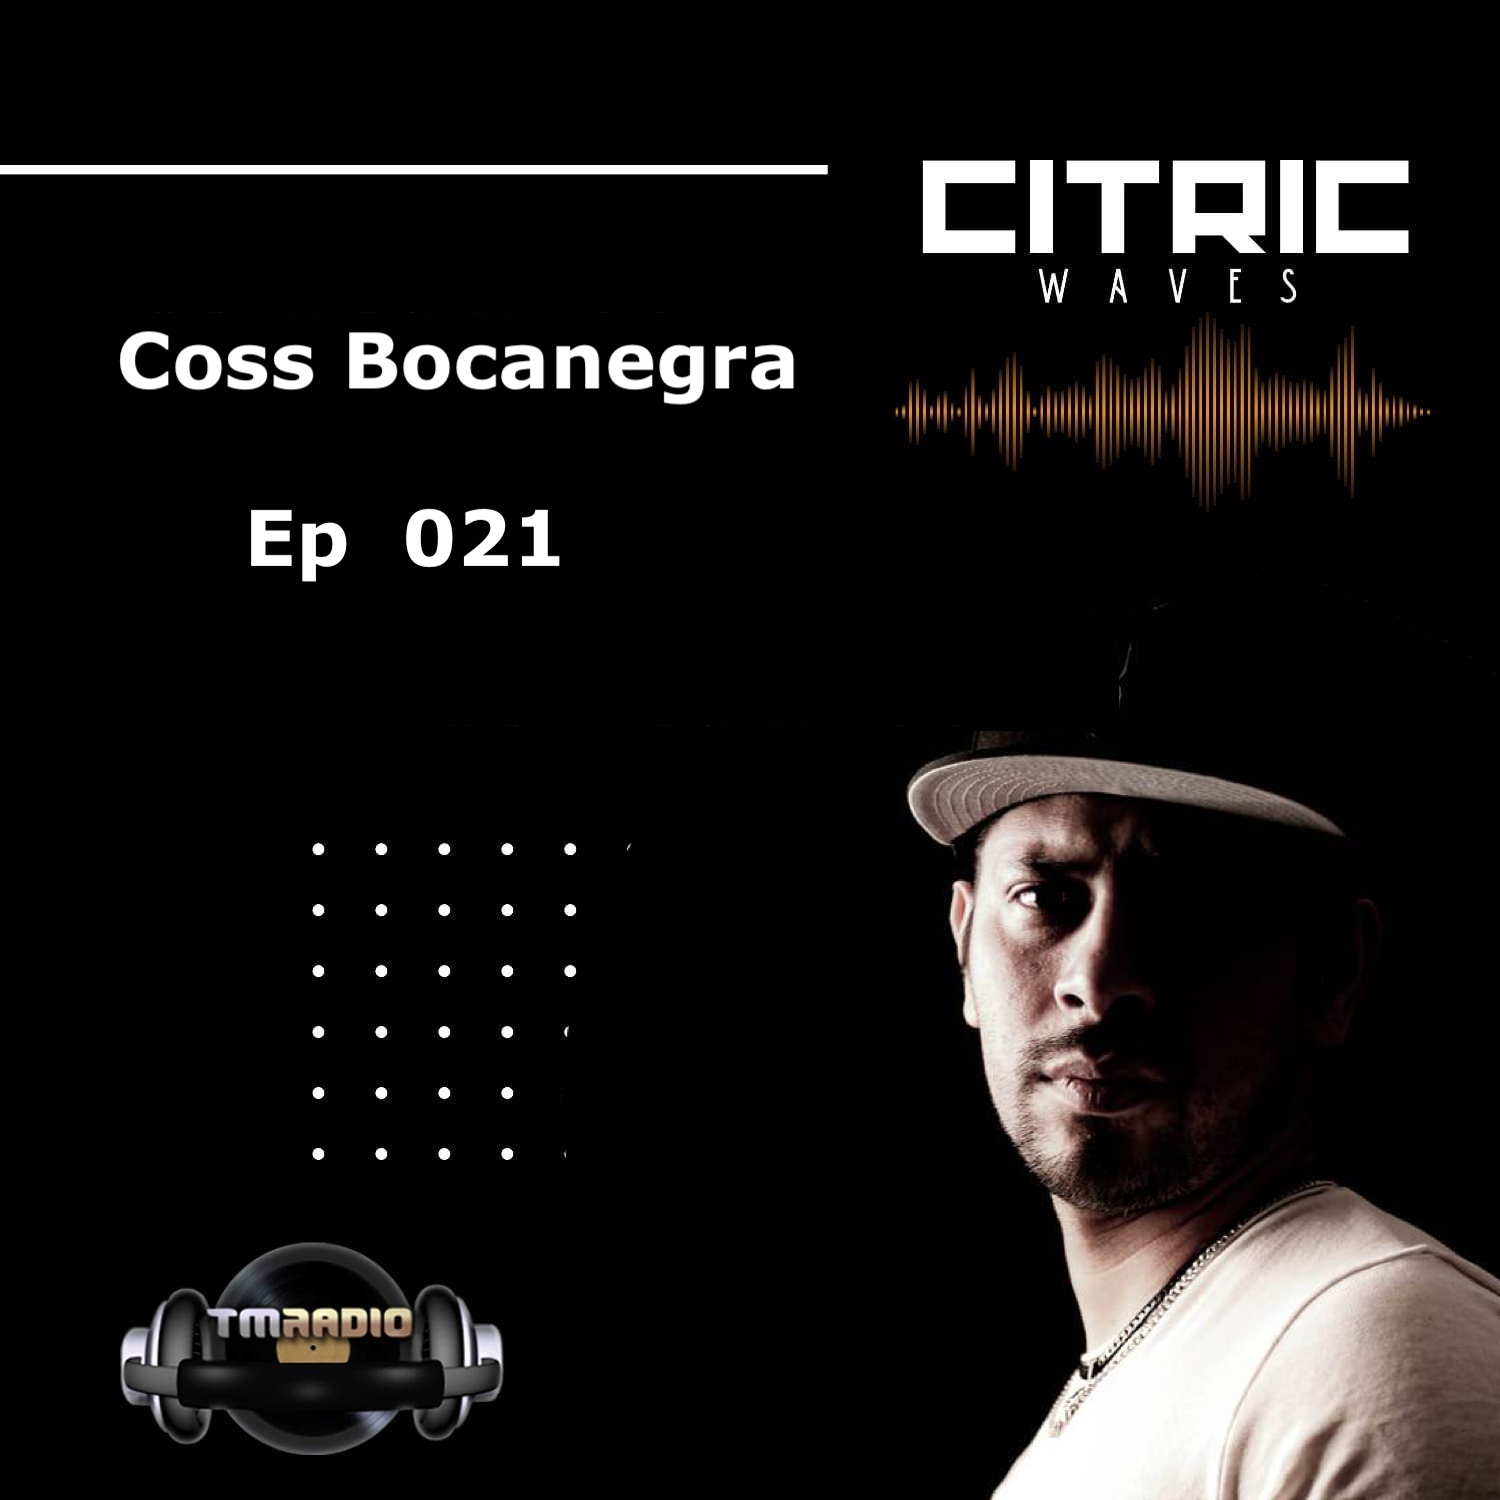 Citric Waves 021 Coss Bocanegra (from April 11th)